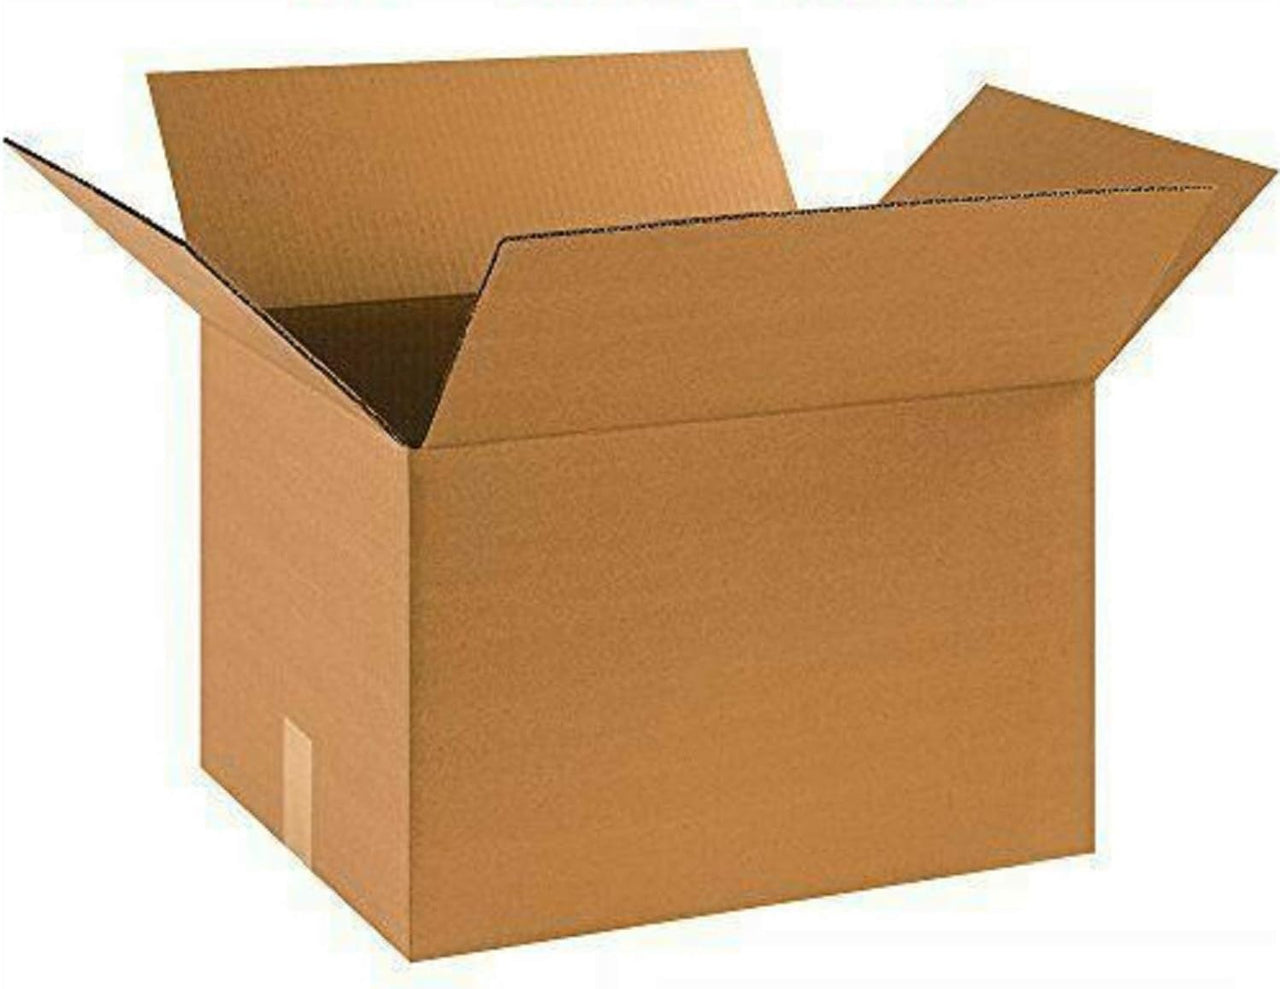 Shipping Boxes 15"L x 15"W x 15"H 25-Pack Corrugated Cardboard Box for Packing Moving Storage